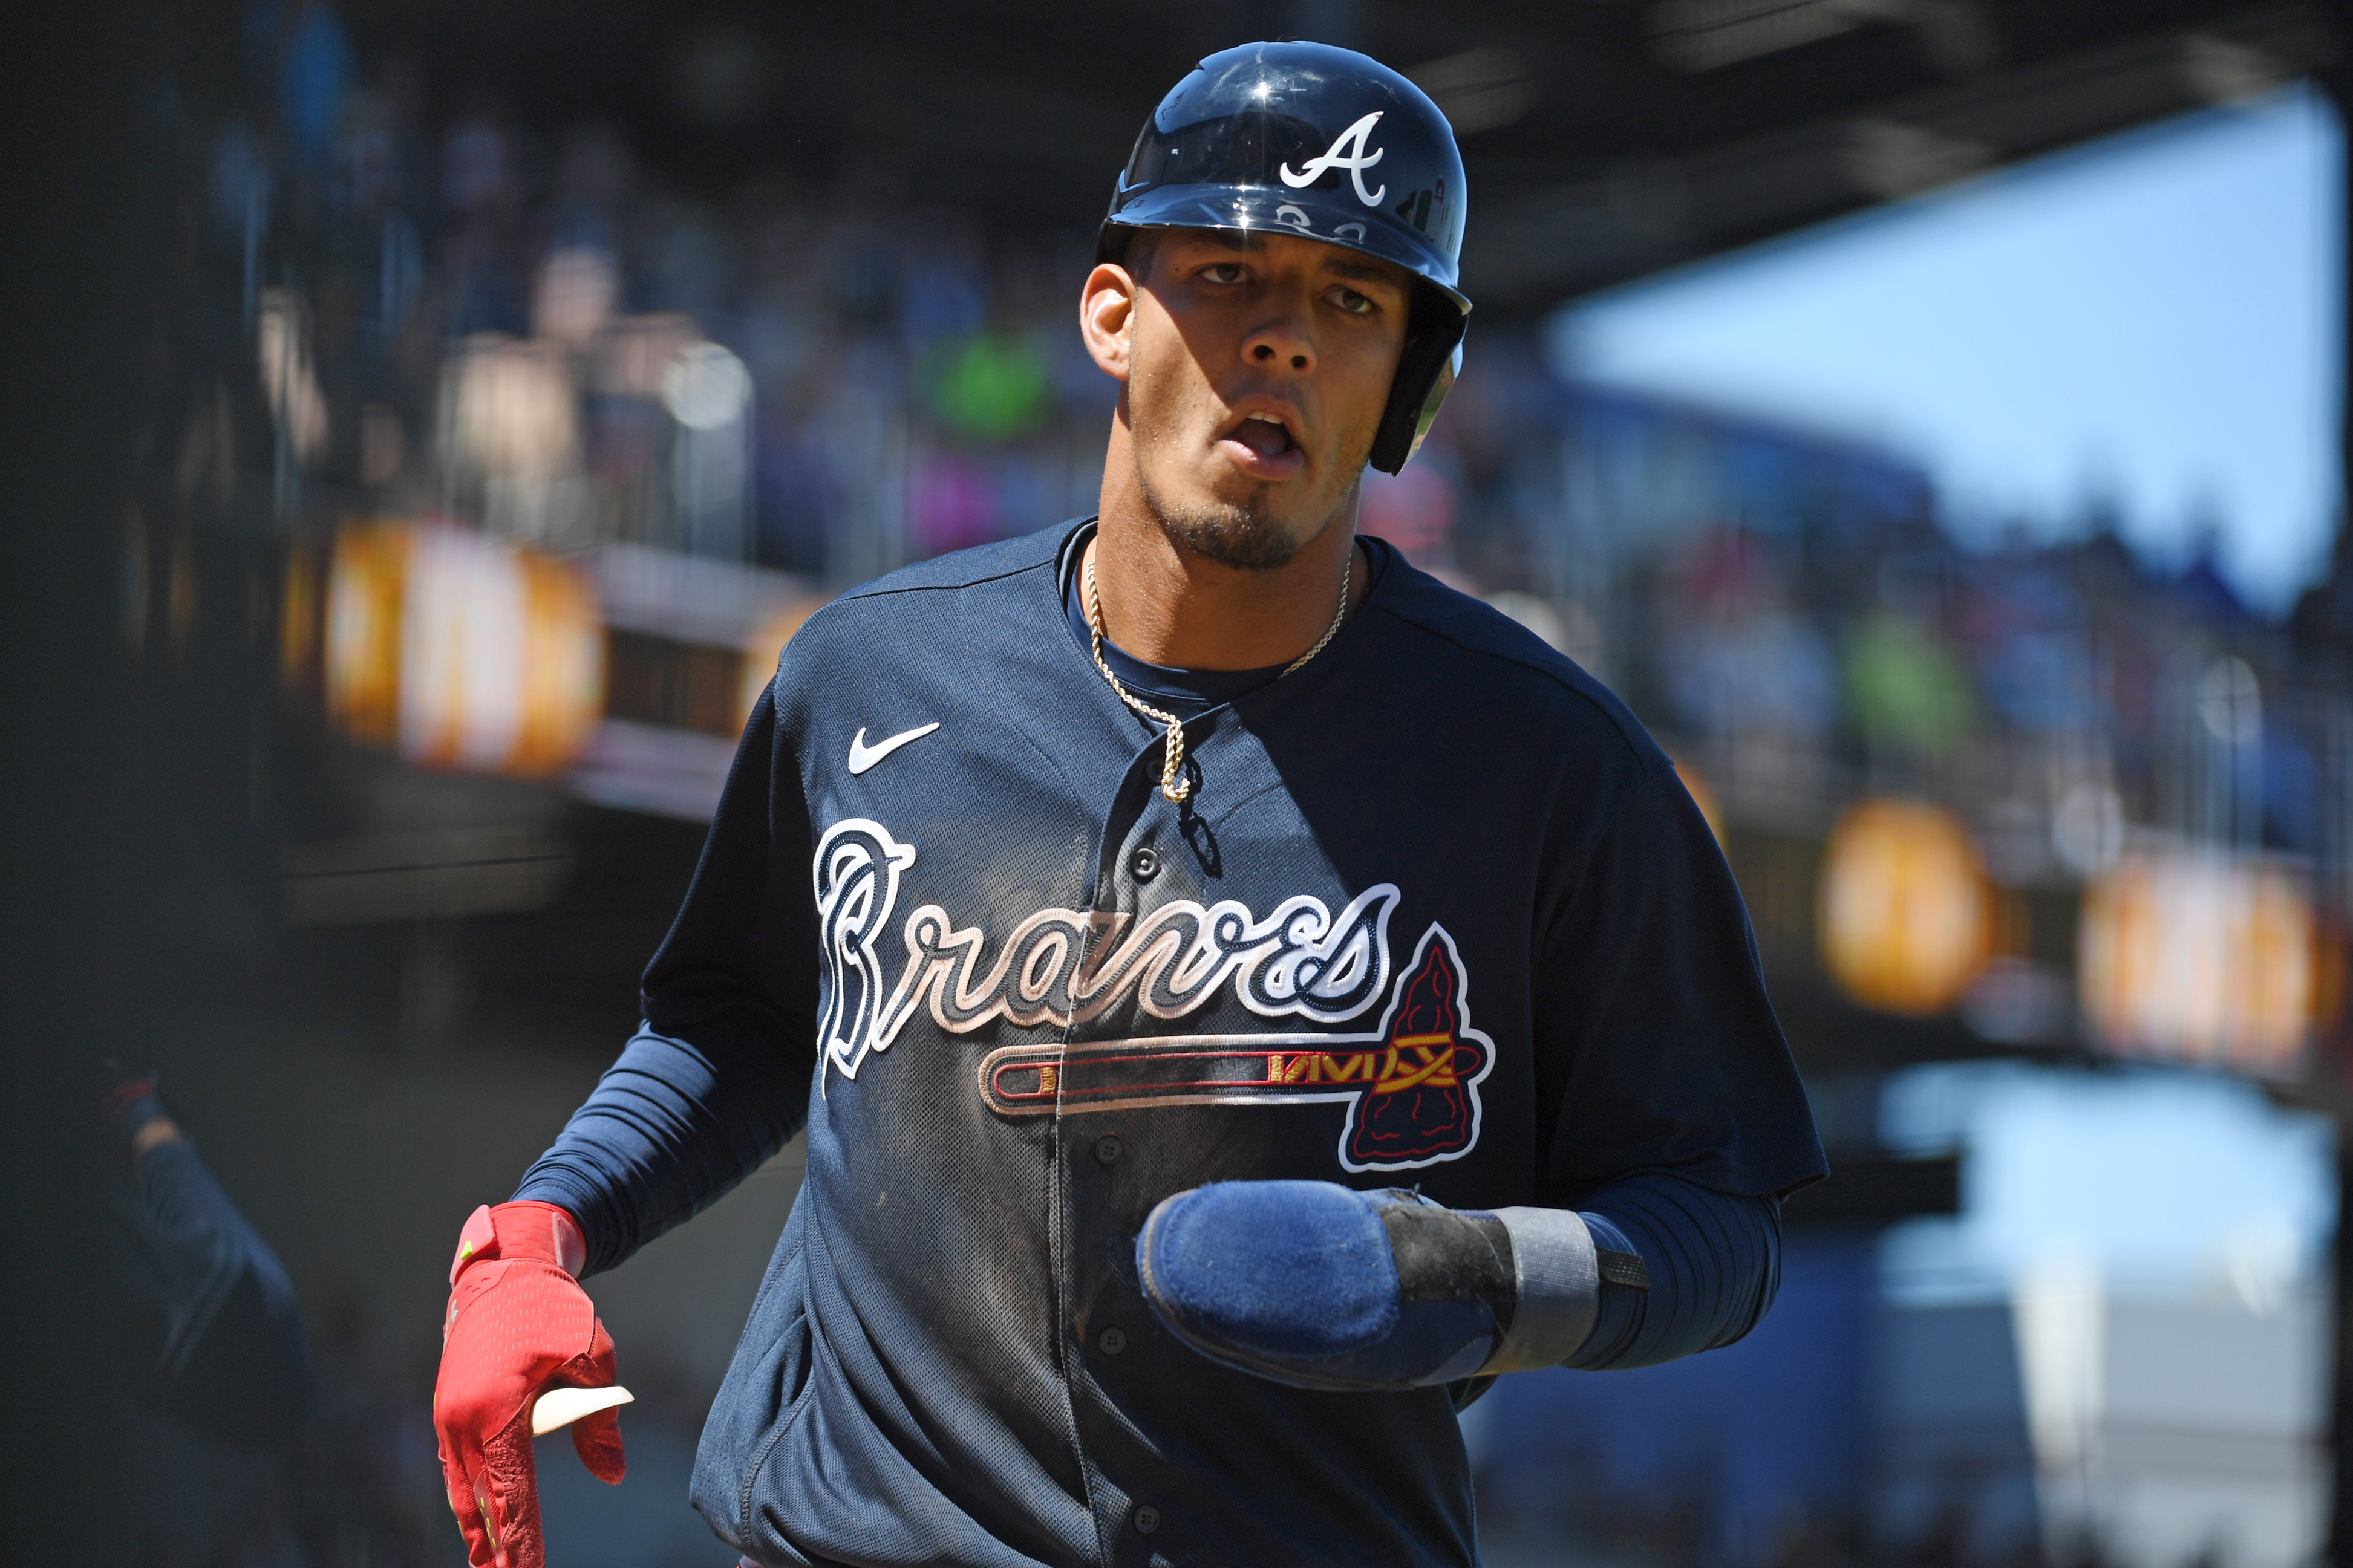 The Braves unveiled their Spring Training uniforms and caps